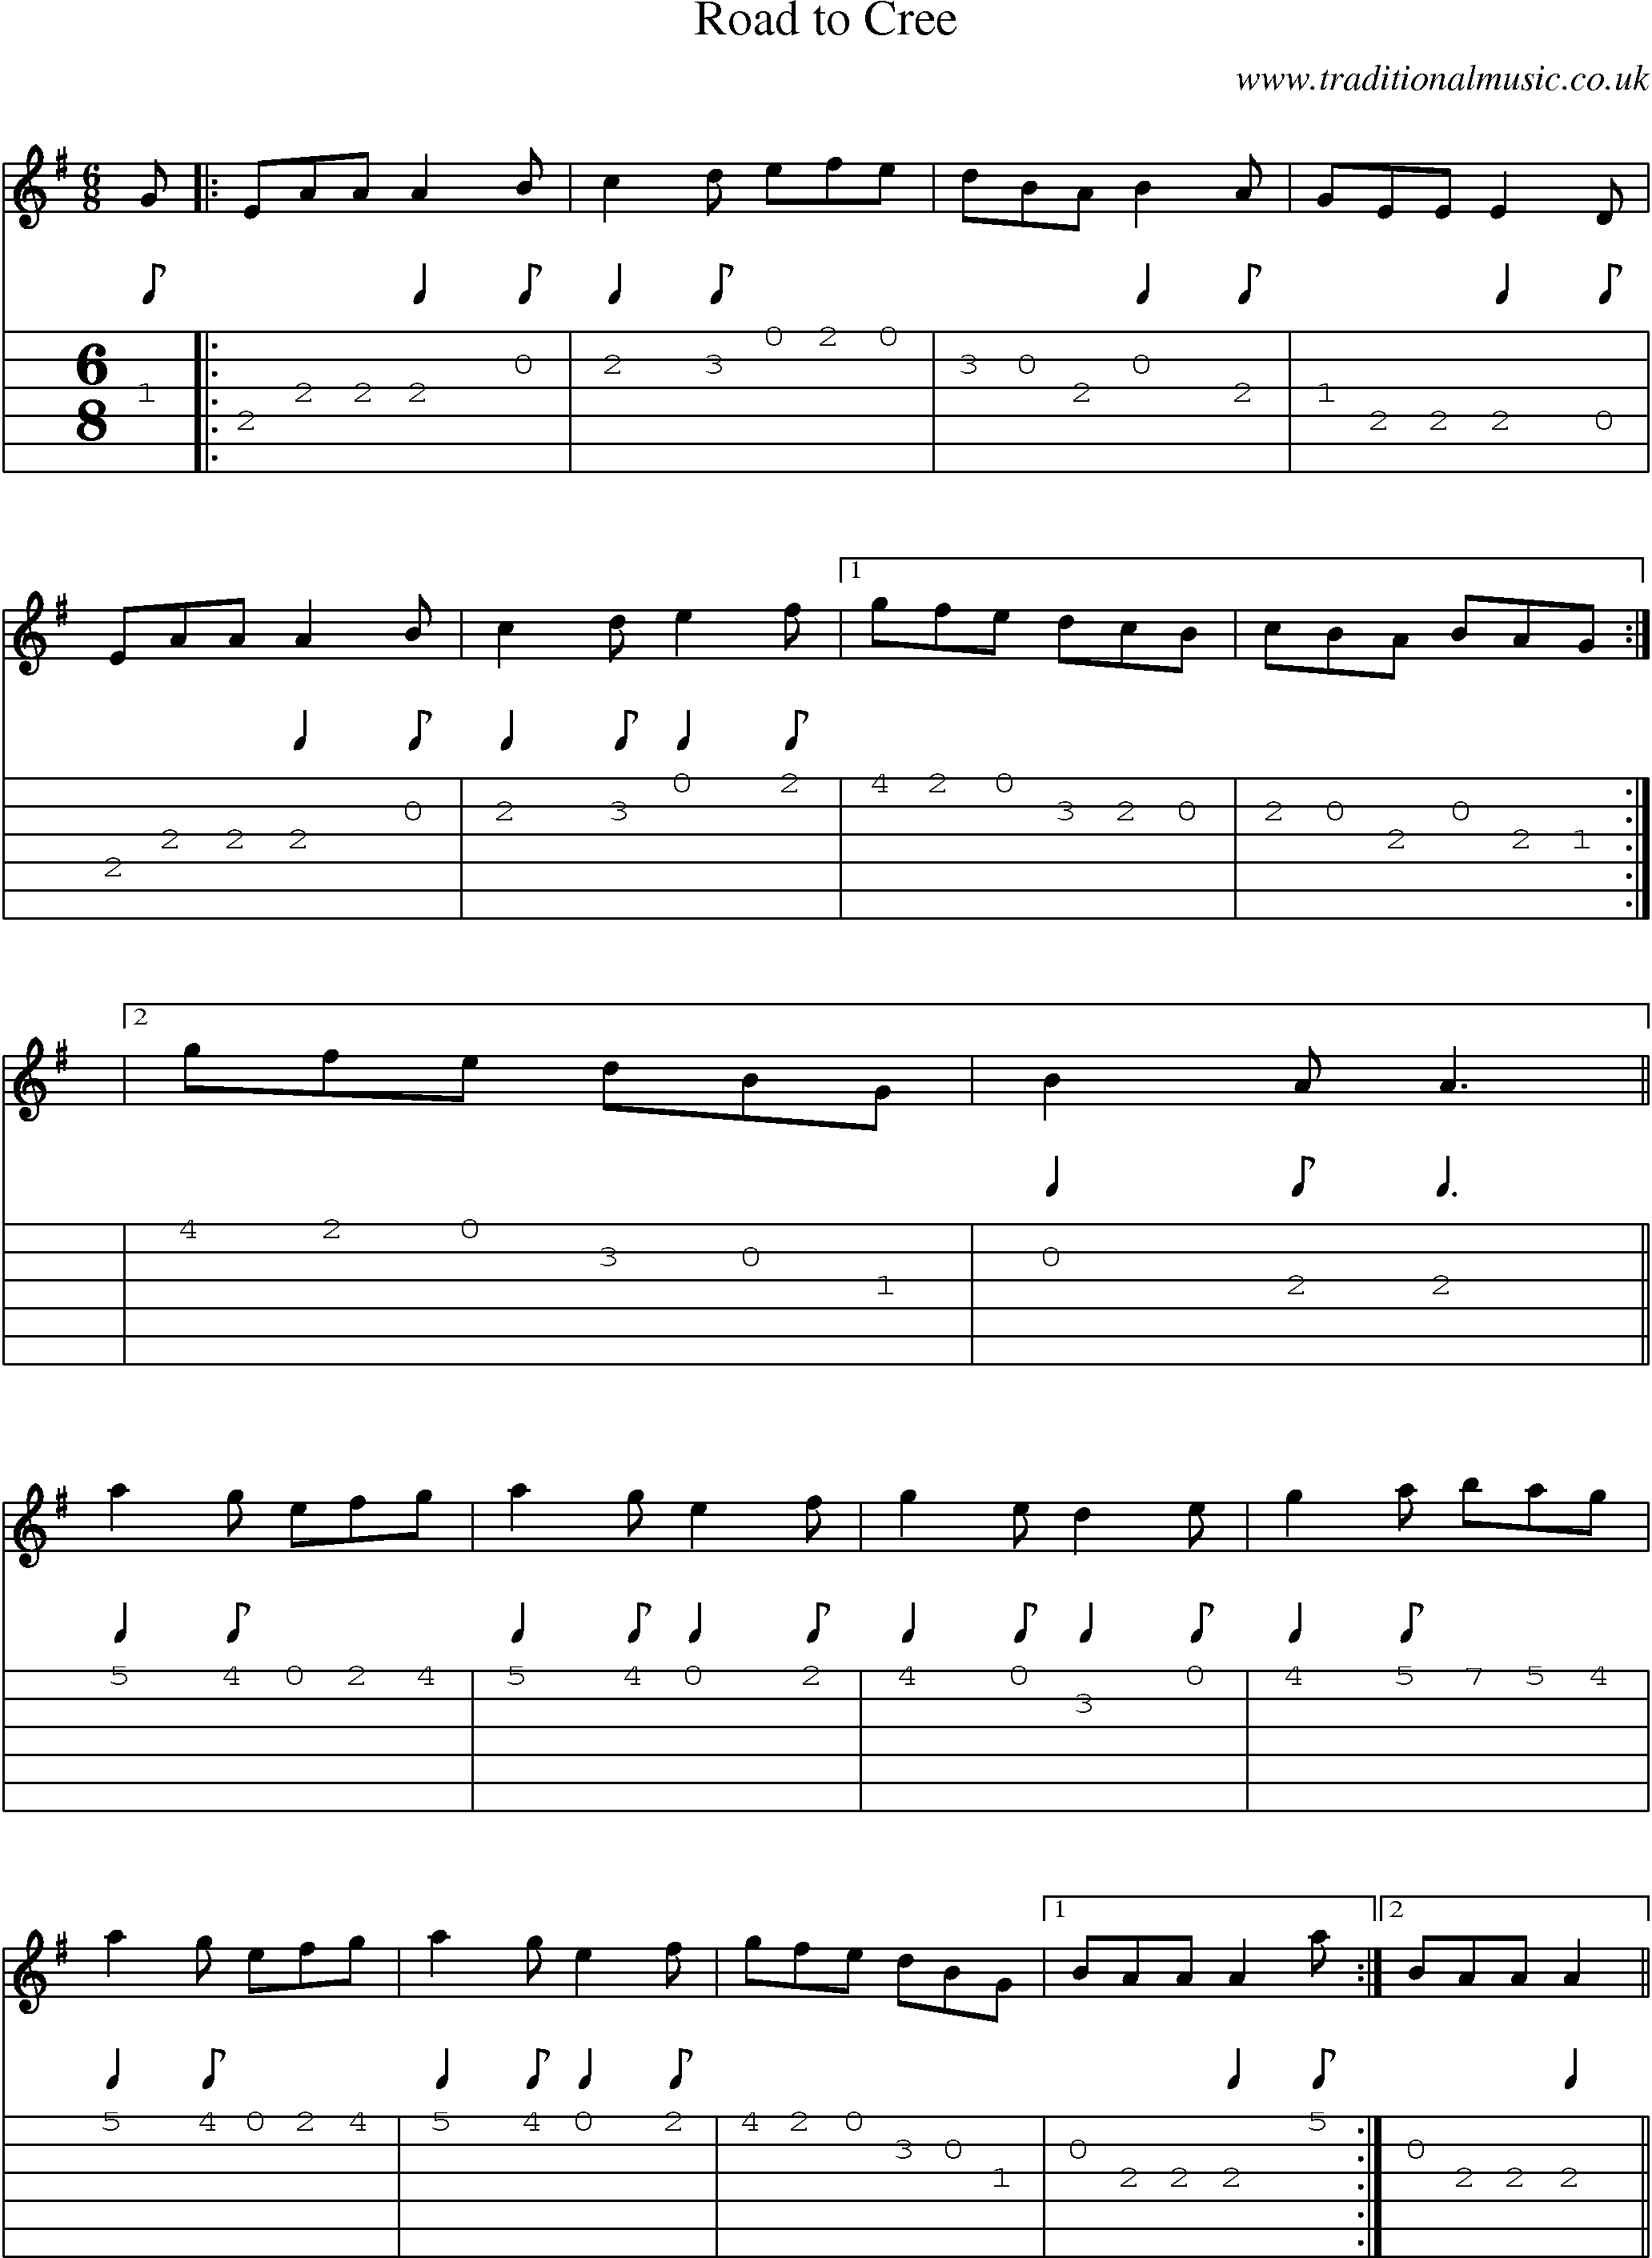 Music Score and Guitar Tabs for Road To Cree